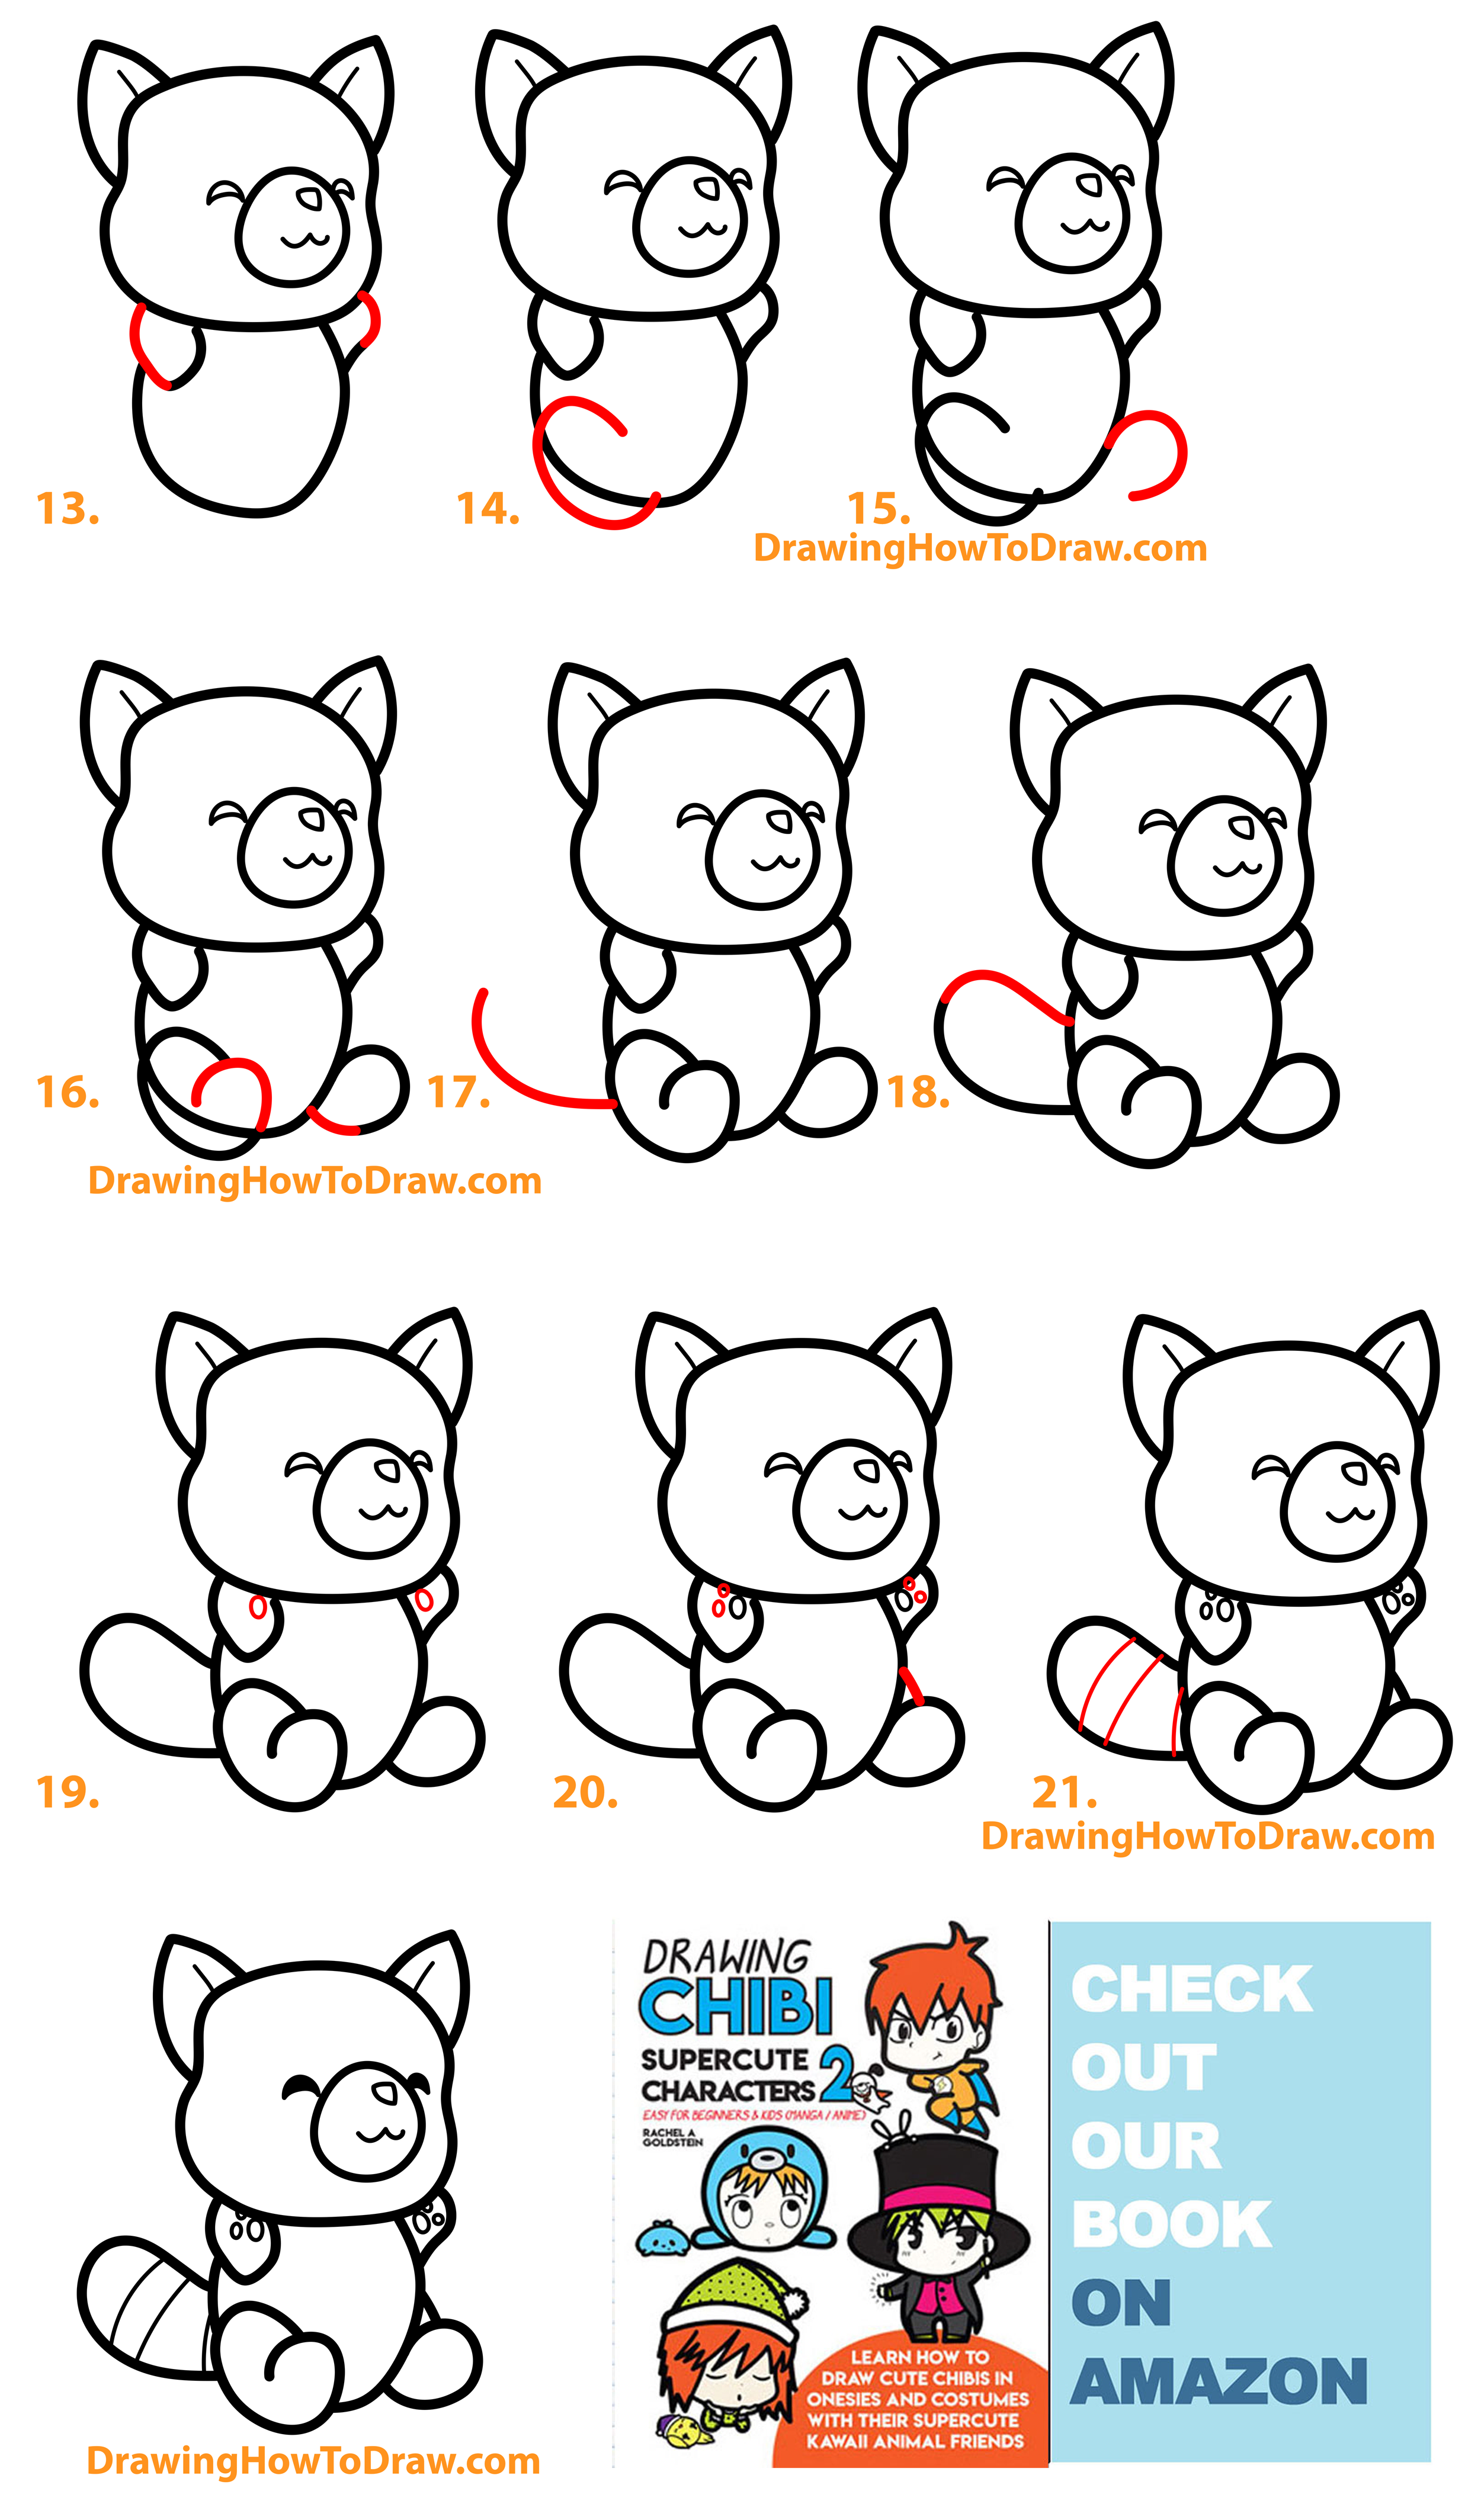 How to Draw a Cute Cartoon Red Panda Easy Step by Step Drawing Tutorial for Kids